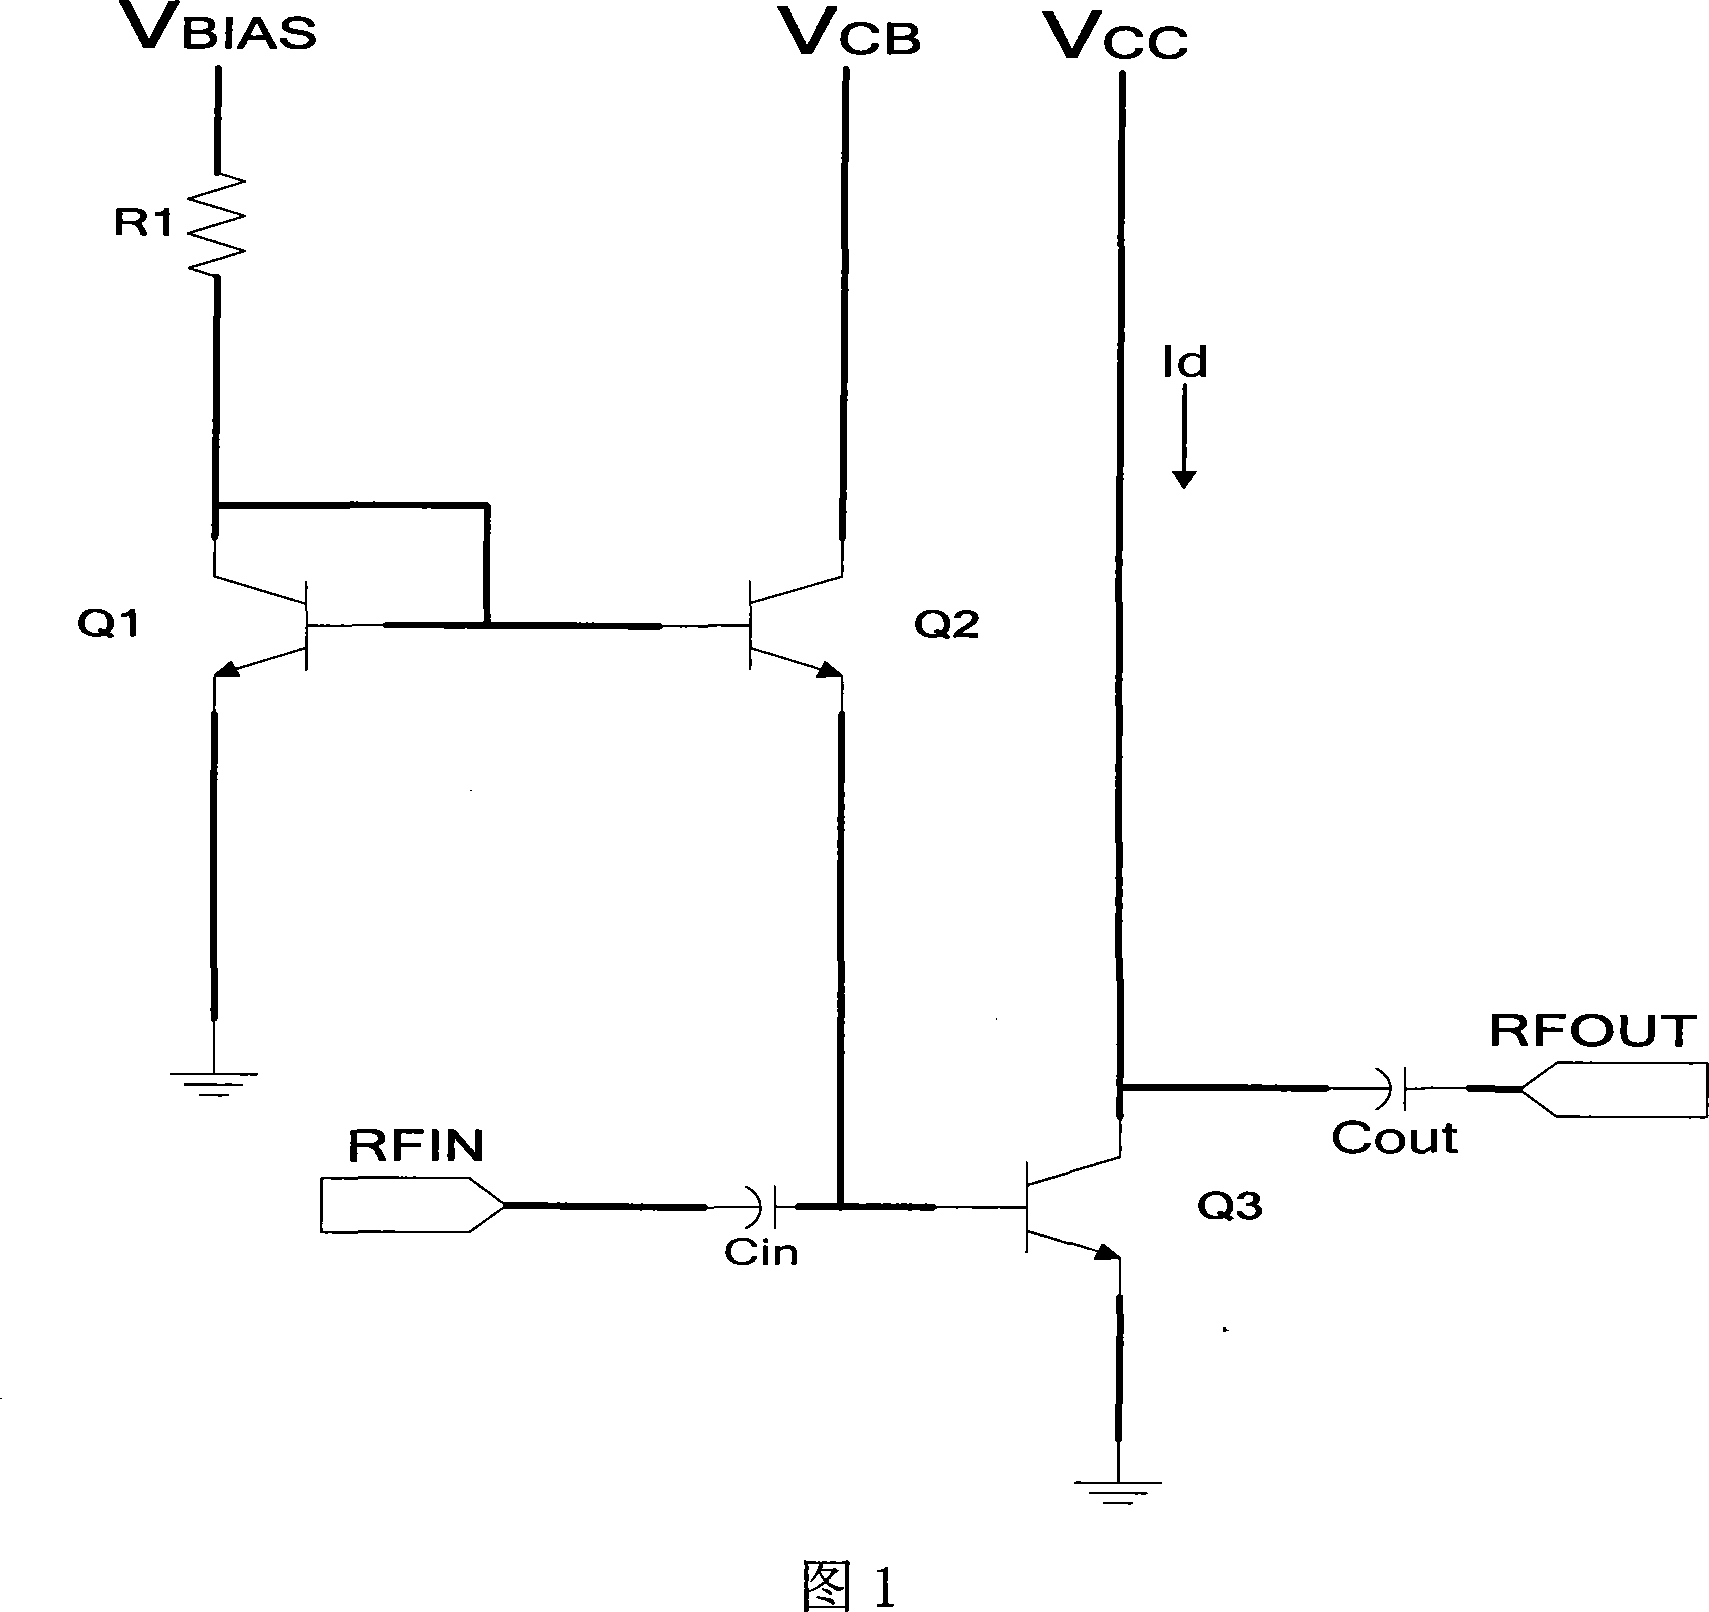 Radio frequency power amplifier circuit